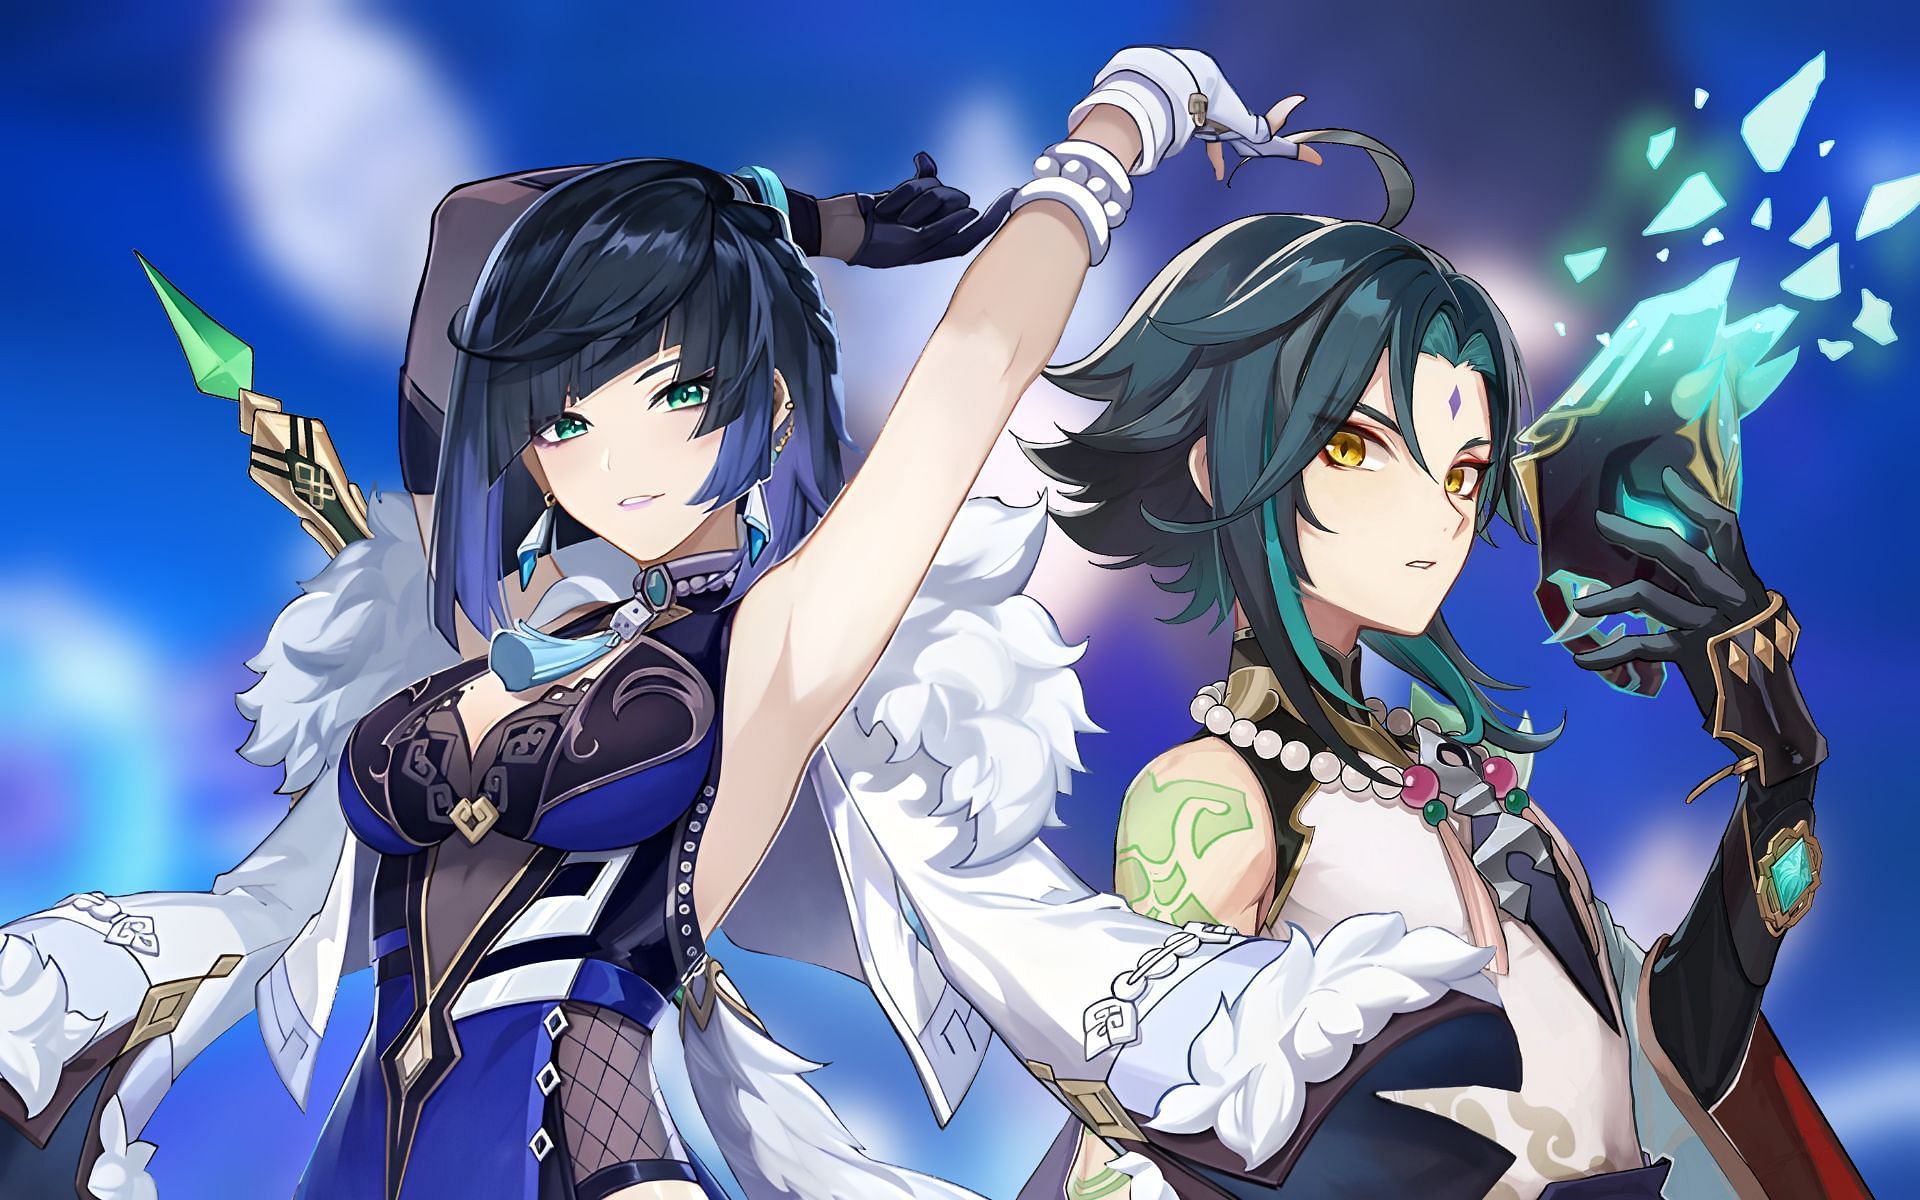 Yelan and Xiao are slated to be on the first banner of Genshin Impact 2.7 (Image via miHoYo)